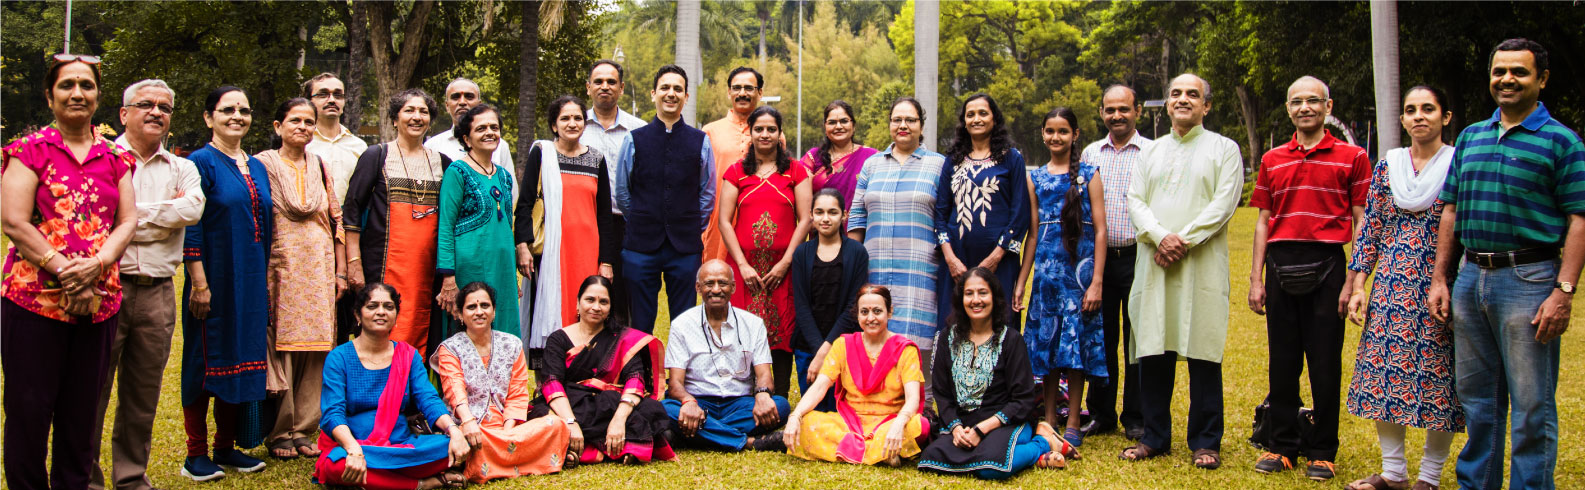 Dr Pramod Tripathi with a team of experts, doctors, mentors, experts in diet, exercise, stress-release, tech-innovators, and support staff